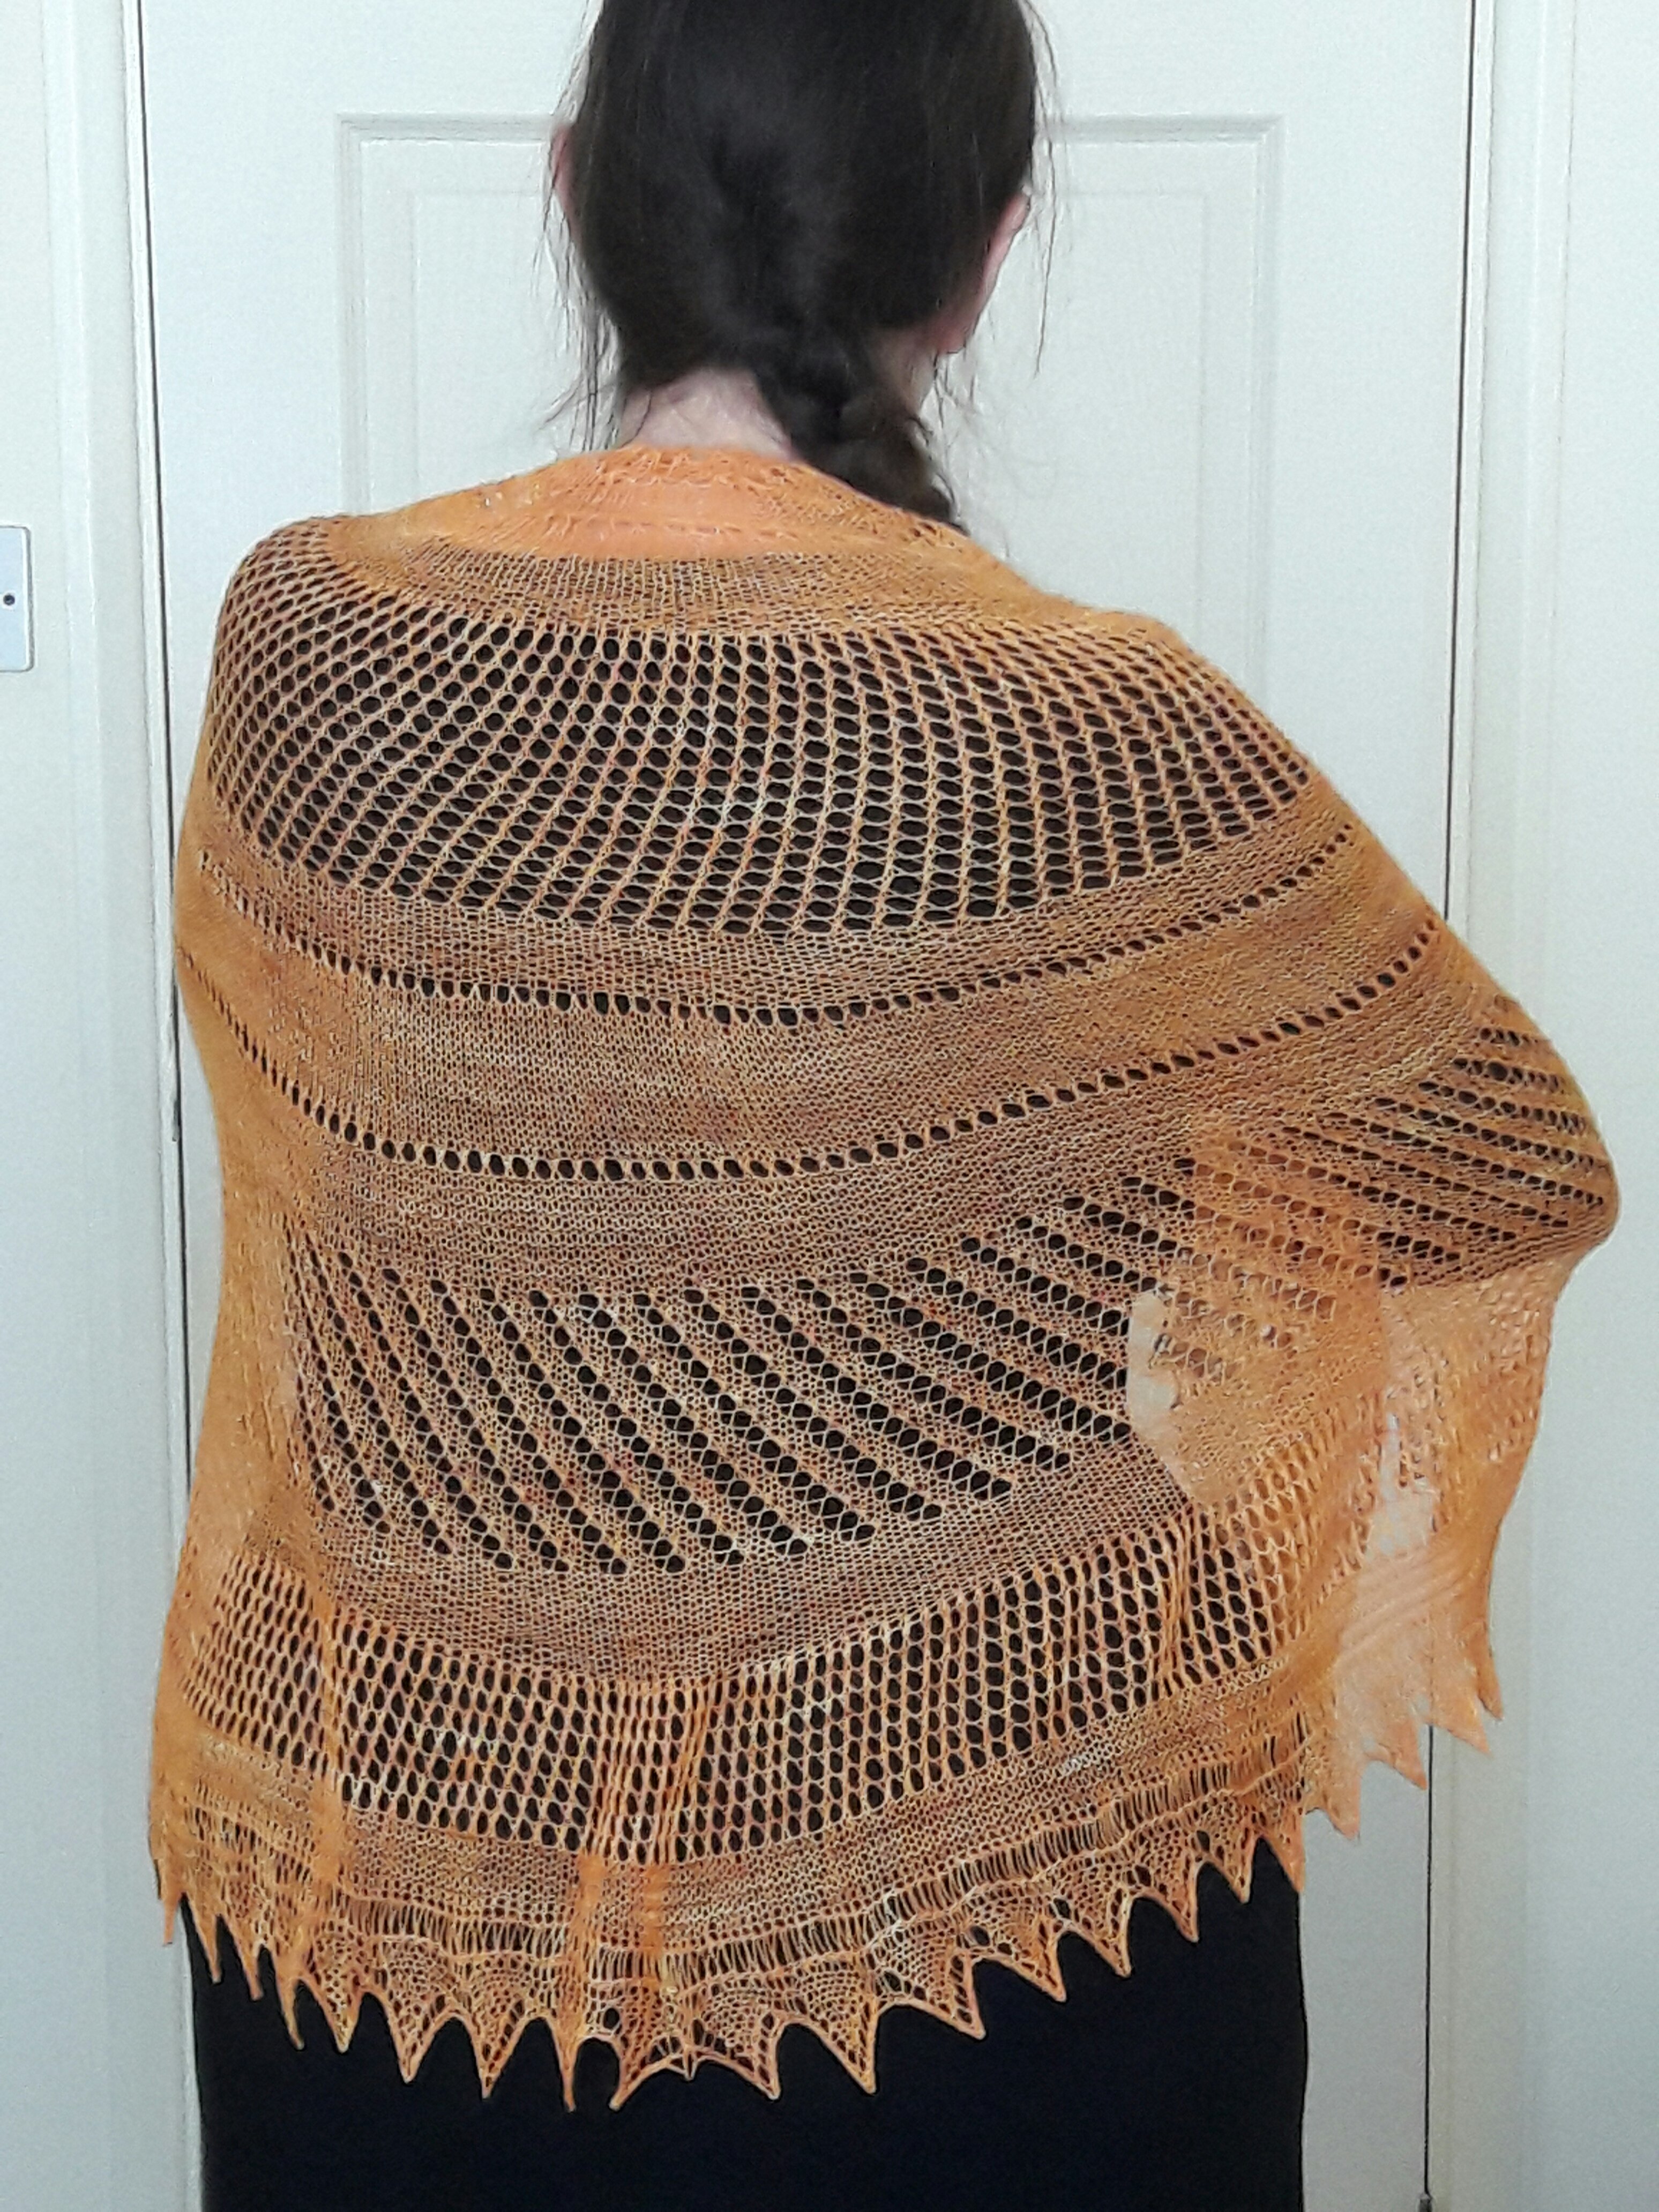 photo of completed shawl wrapped around the blogger